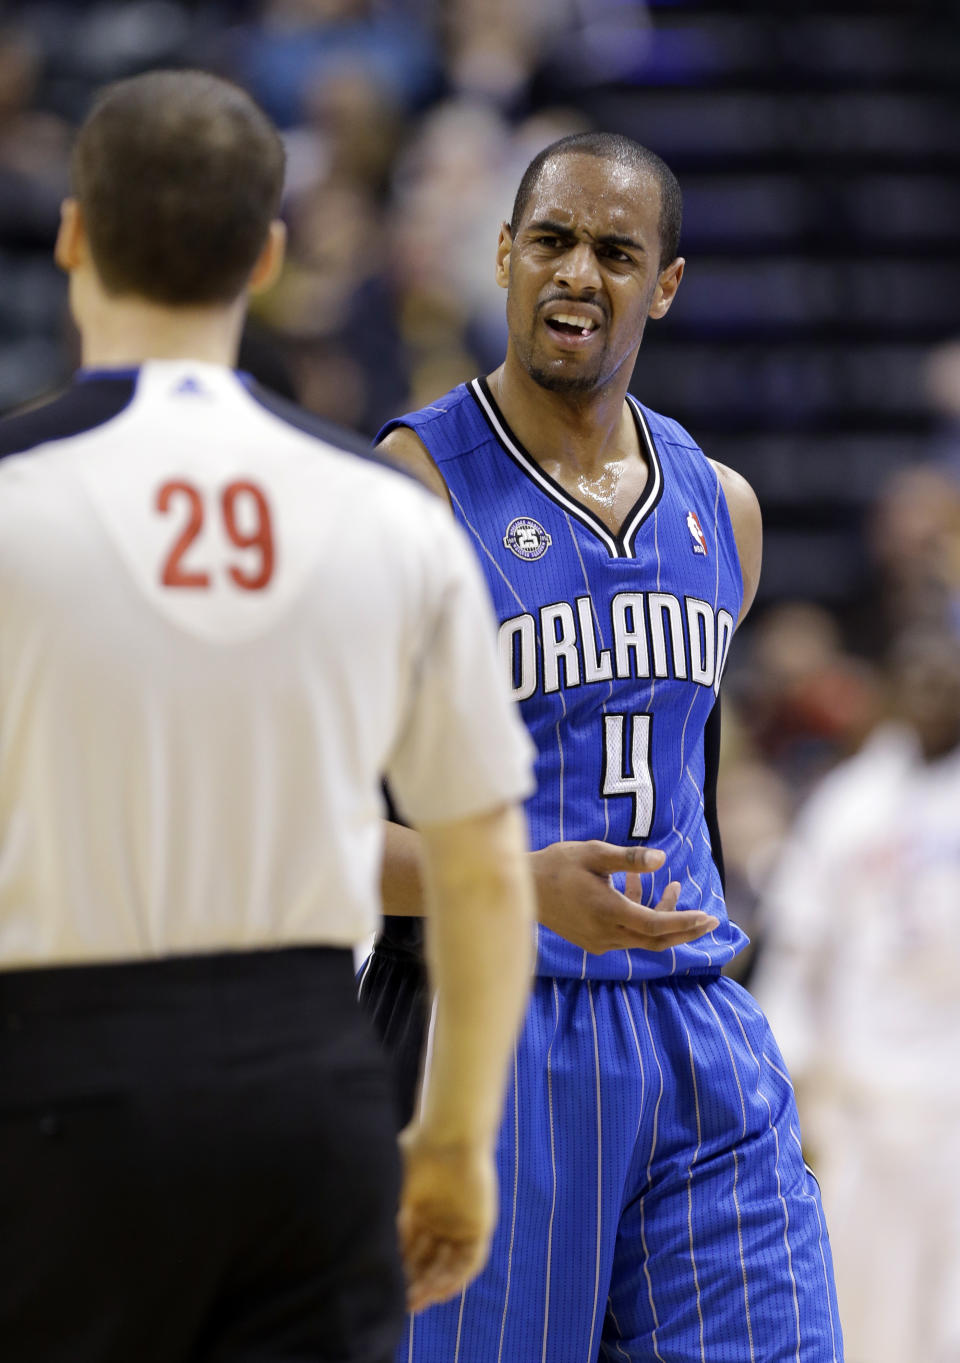 Orlando Magic guard Arron Afflalo continues to question referee Mark Lindsay after he was charged with a technical foul in the second half of an NBA basketball game against the Indiana Pacers in Indianapolis, Monday, Feb. 3, 2014. The Pacers defeated the Magic 98-79. (AP Photo/Michael Conroy)